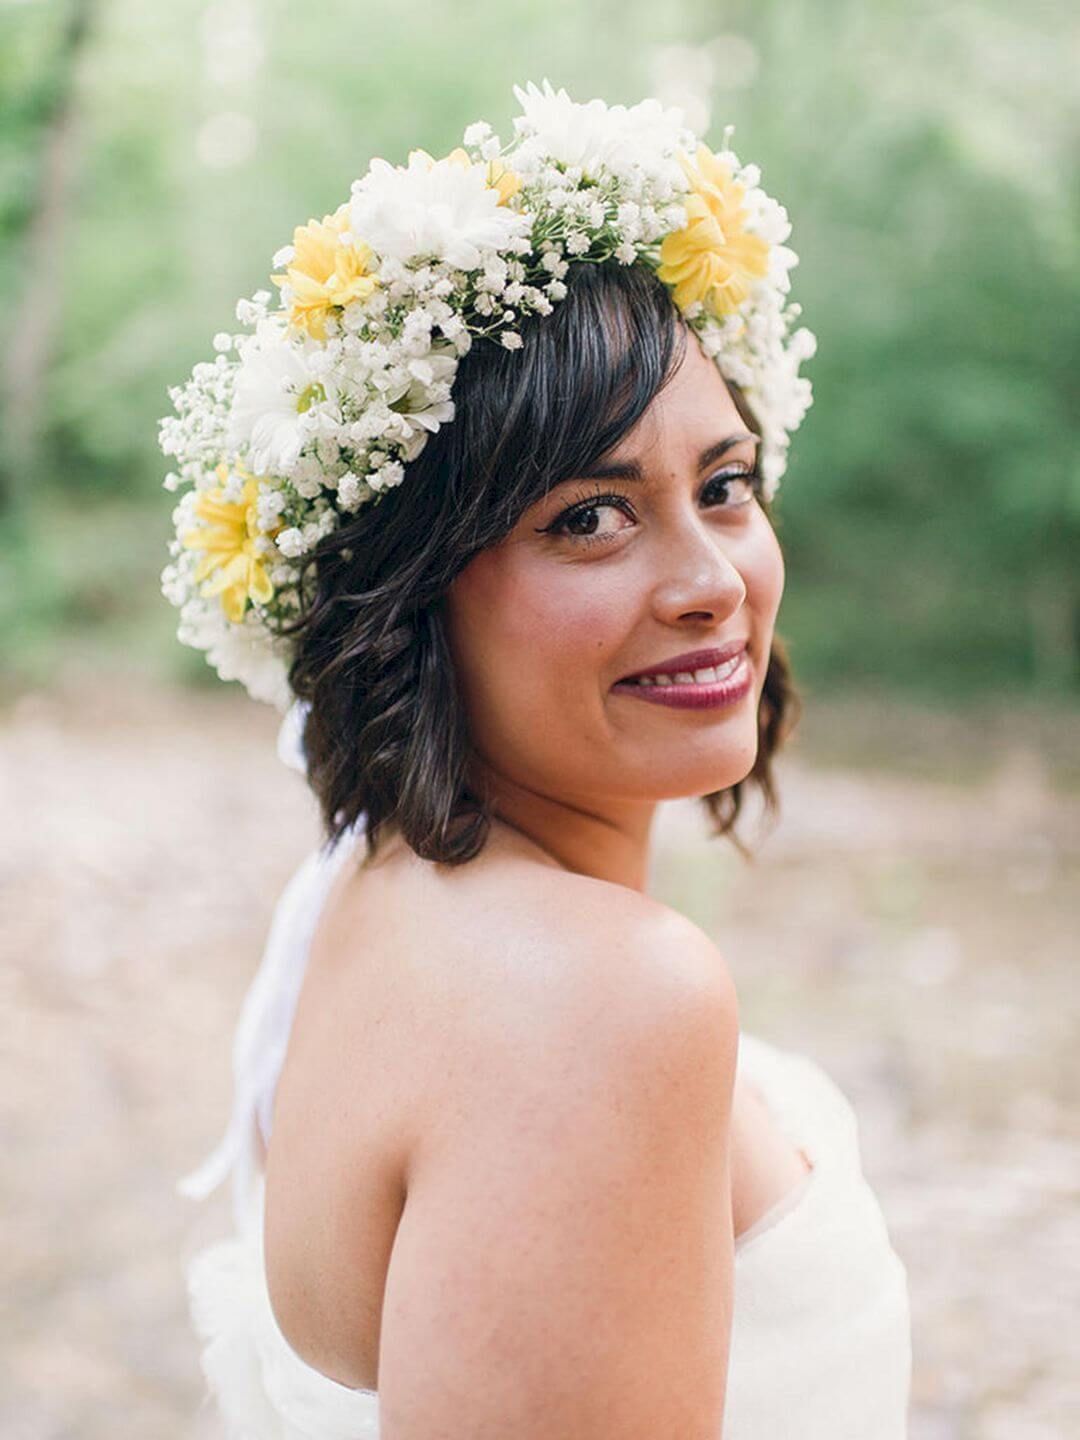 Ultimate Bridal Hairdo with Curly Bangs and Floral Tiara